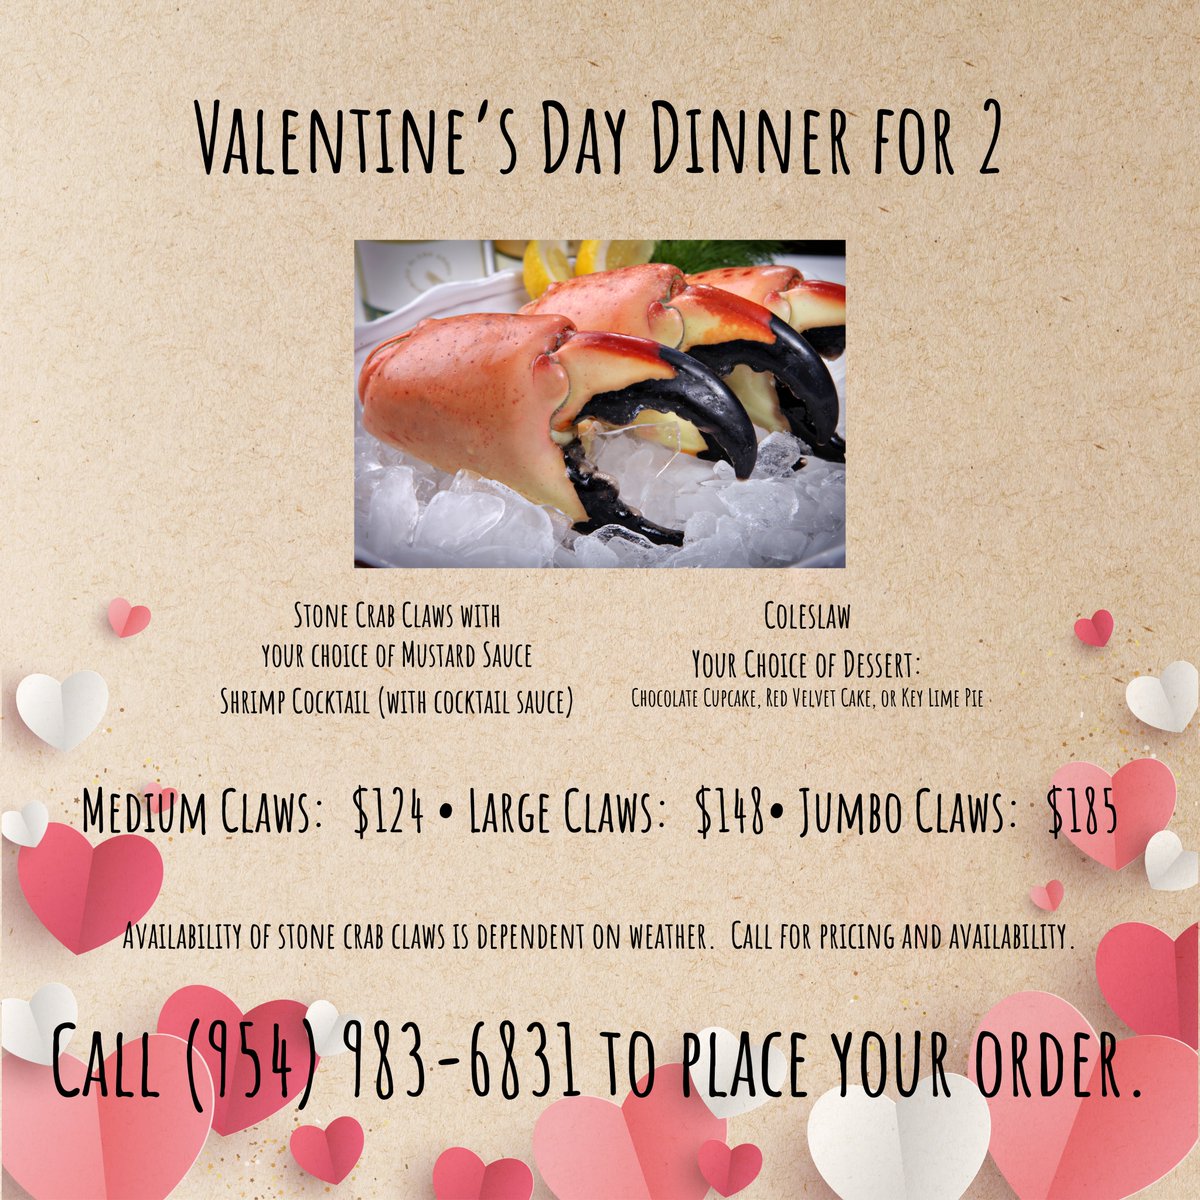 VALENTINE'S DAY DINNER FOR 2  - Impress your Valentine with this tantalizing dinner for 2, featuring our famous fresh Stone Crab Claws! Call (954) 983-6831 & place your order today! #ValentinesDay2023 #StoneCrabClaws #DinnerFor2 #ThinkFreshThinkDelaware